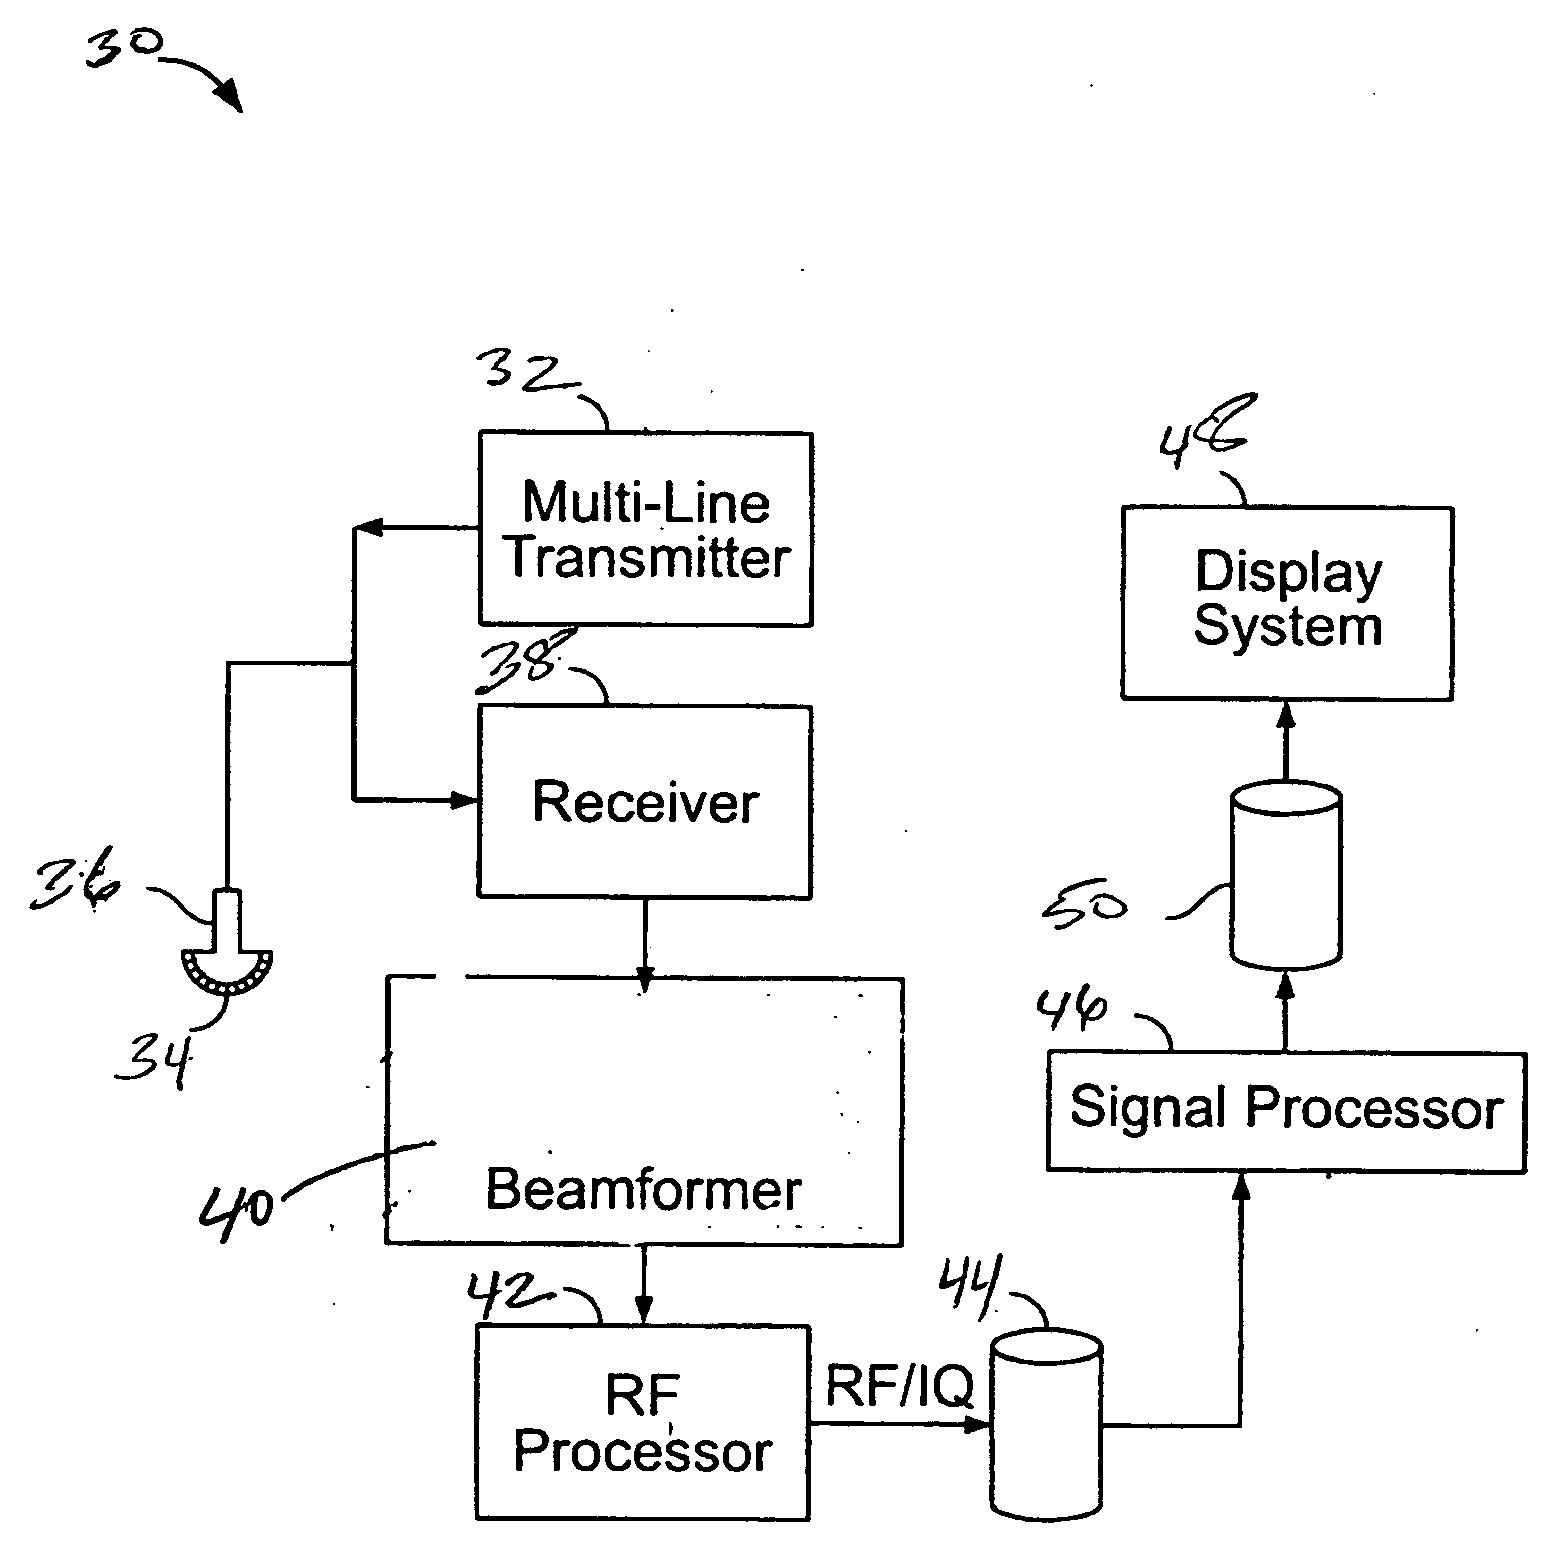 Methods and systems for spatial compounding in a handheld ultrasound device